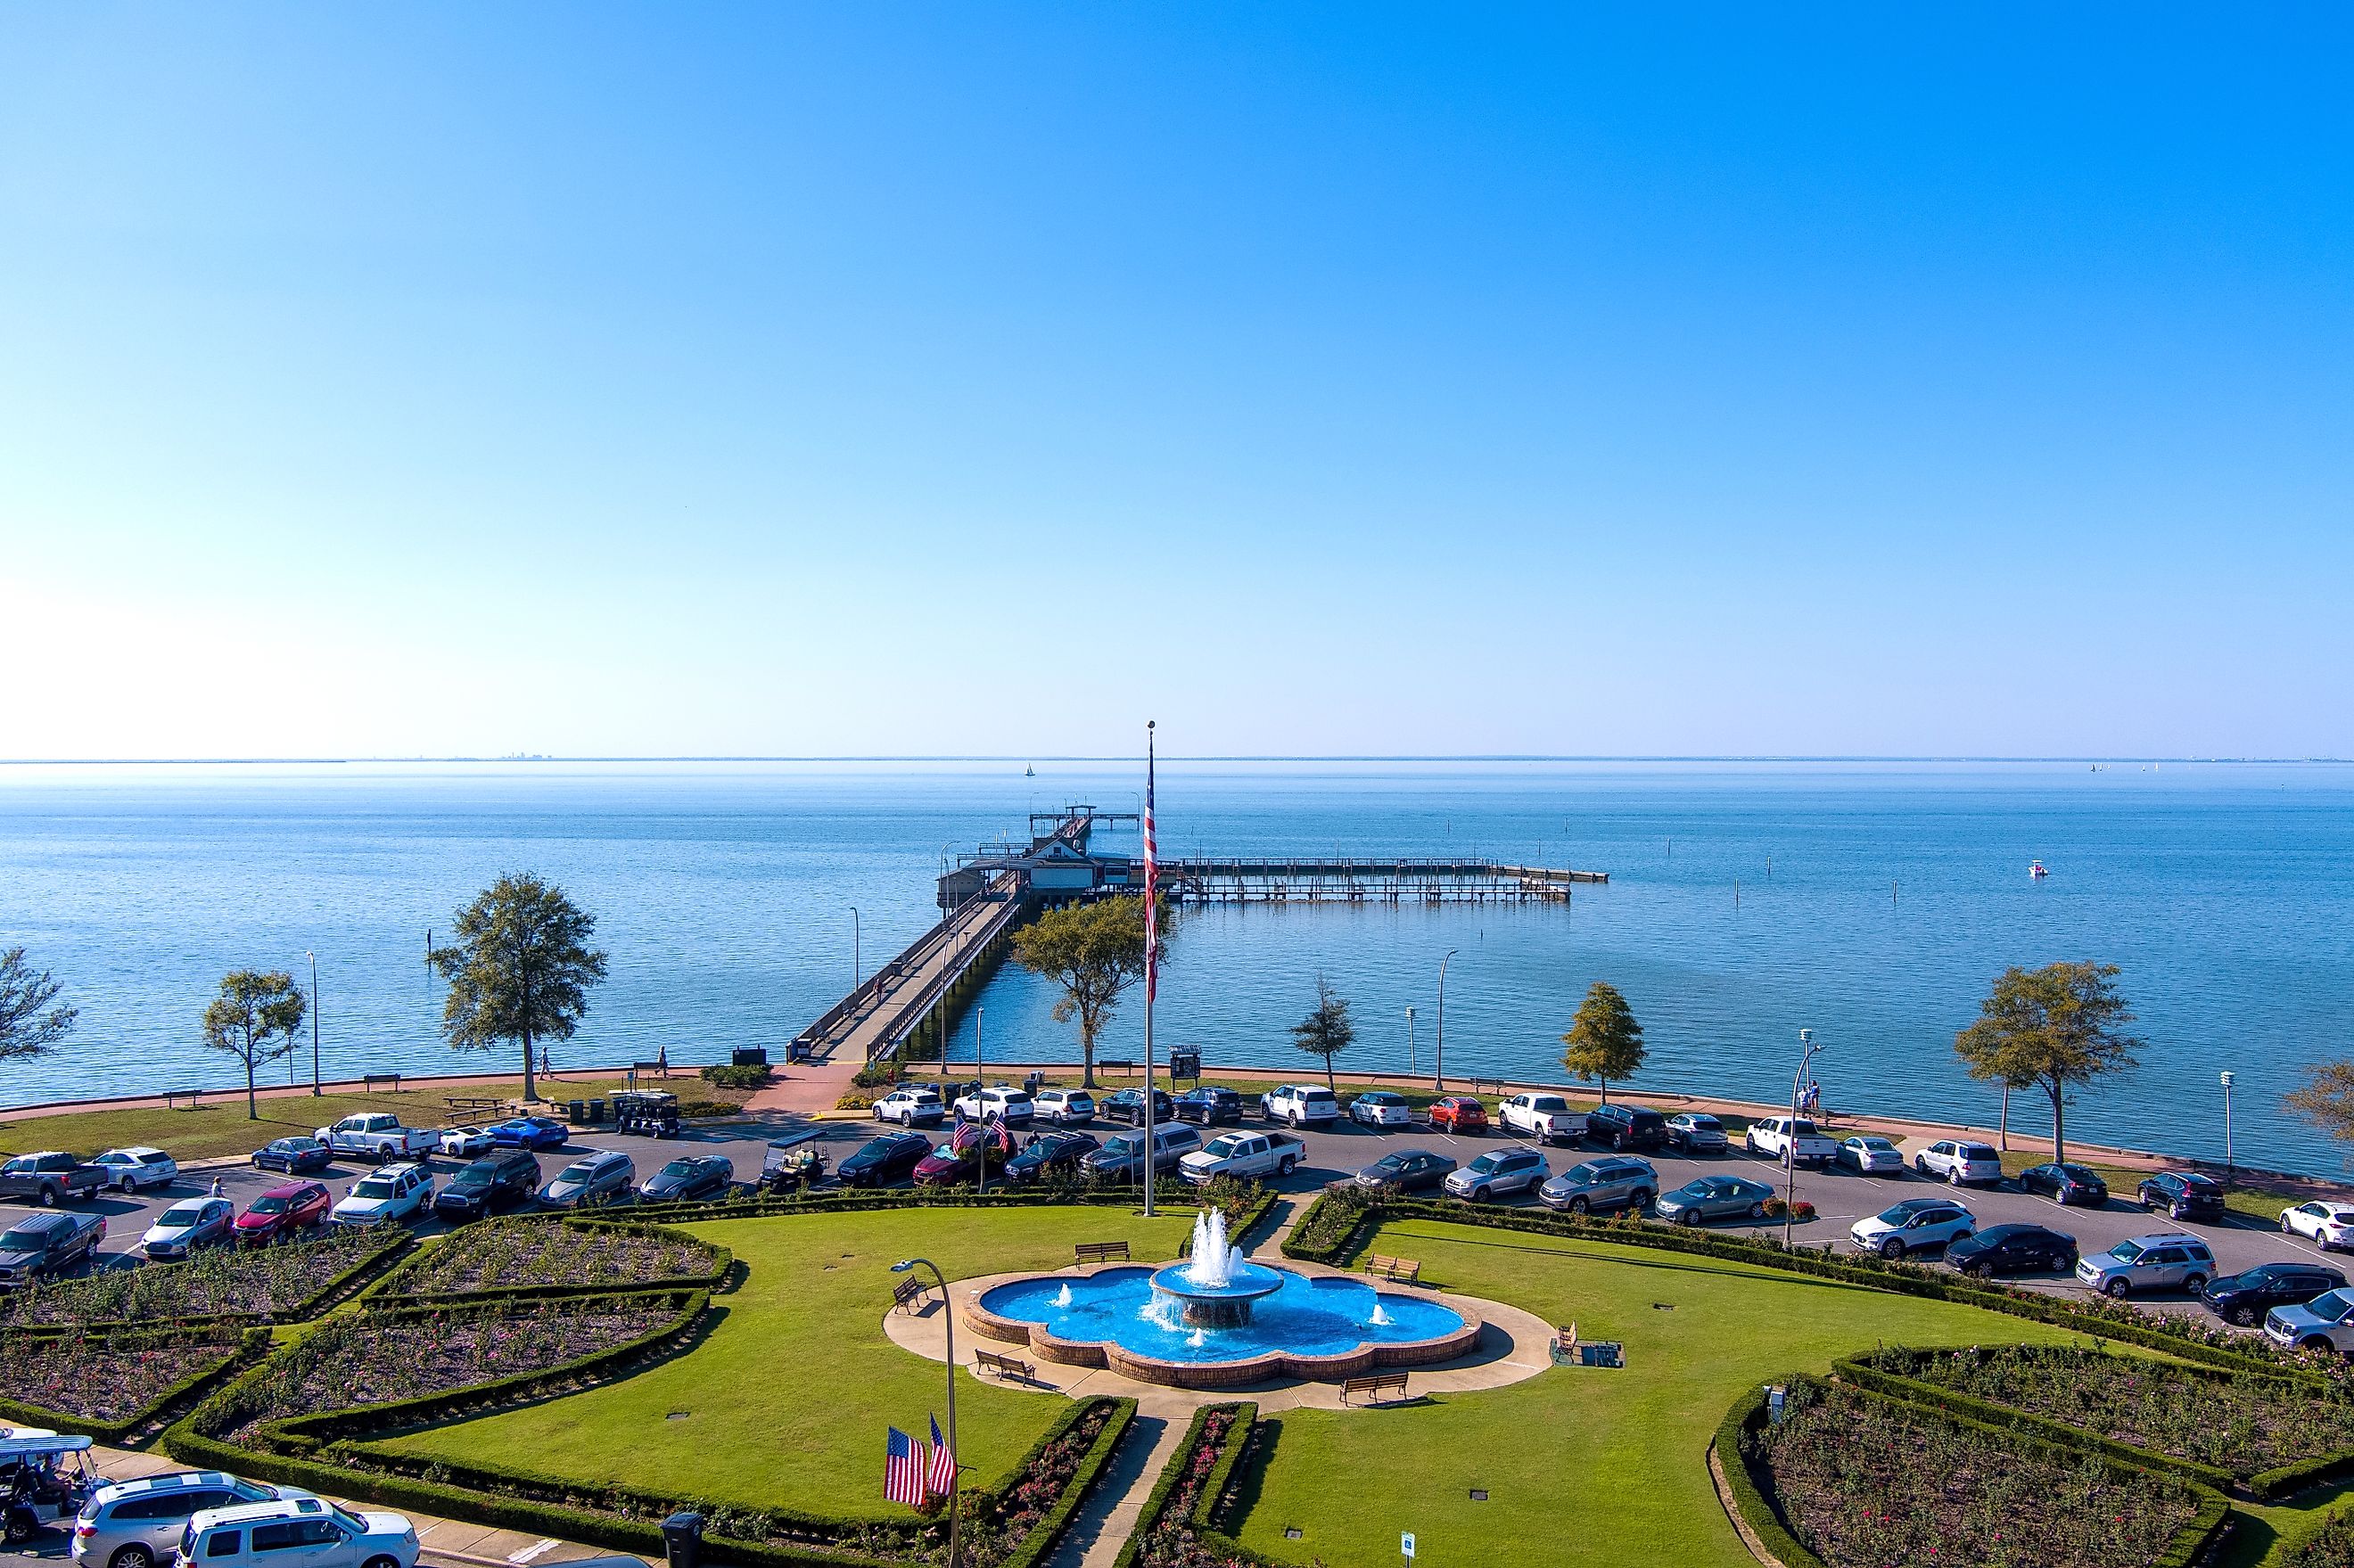 Aerial view of the Fairhope, Alabama Municipal Pier on the eastern shore of Mobile Bay